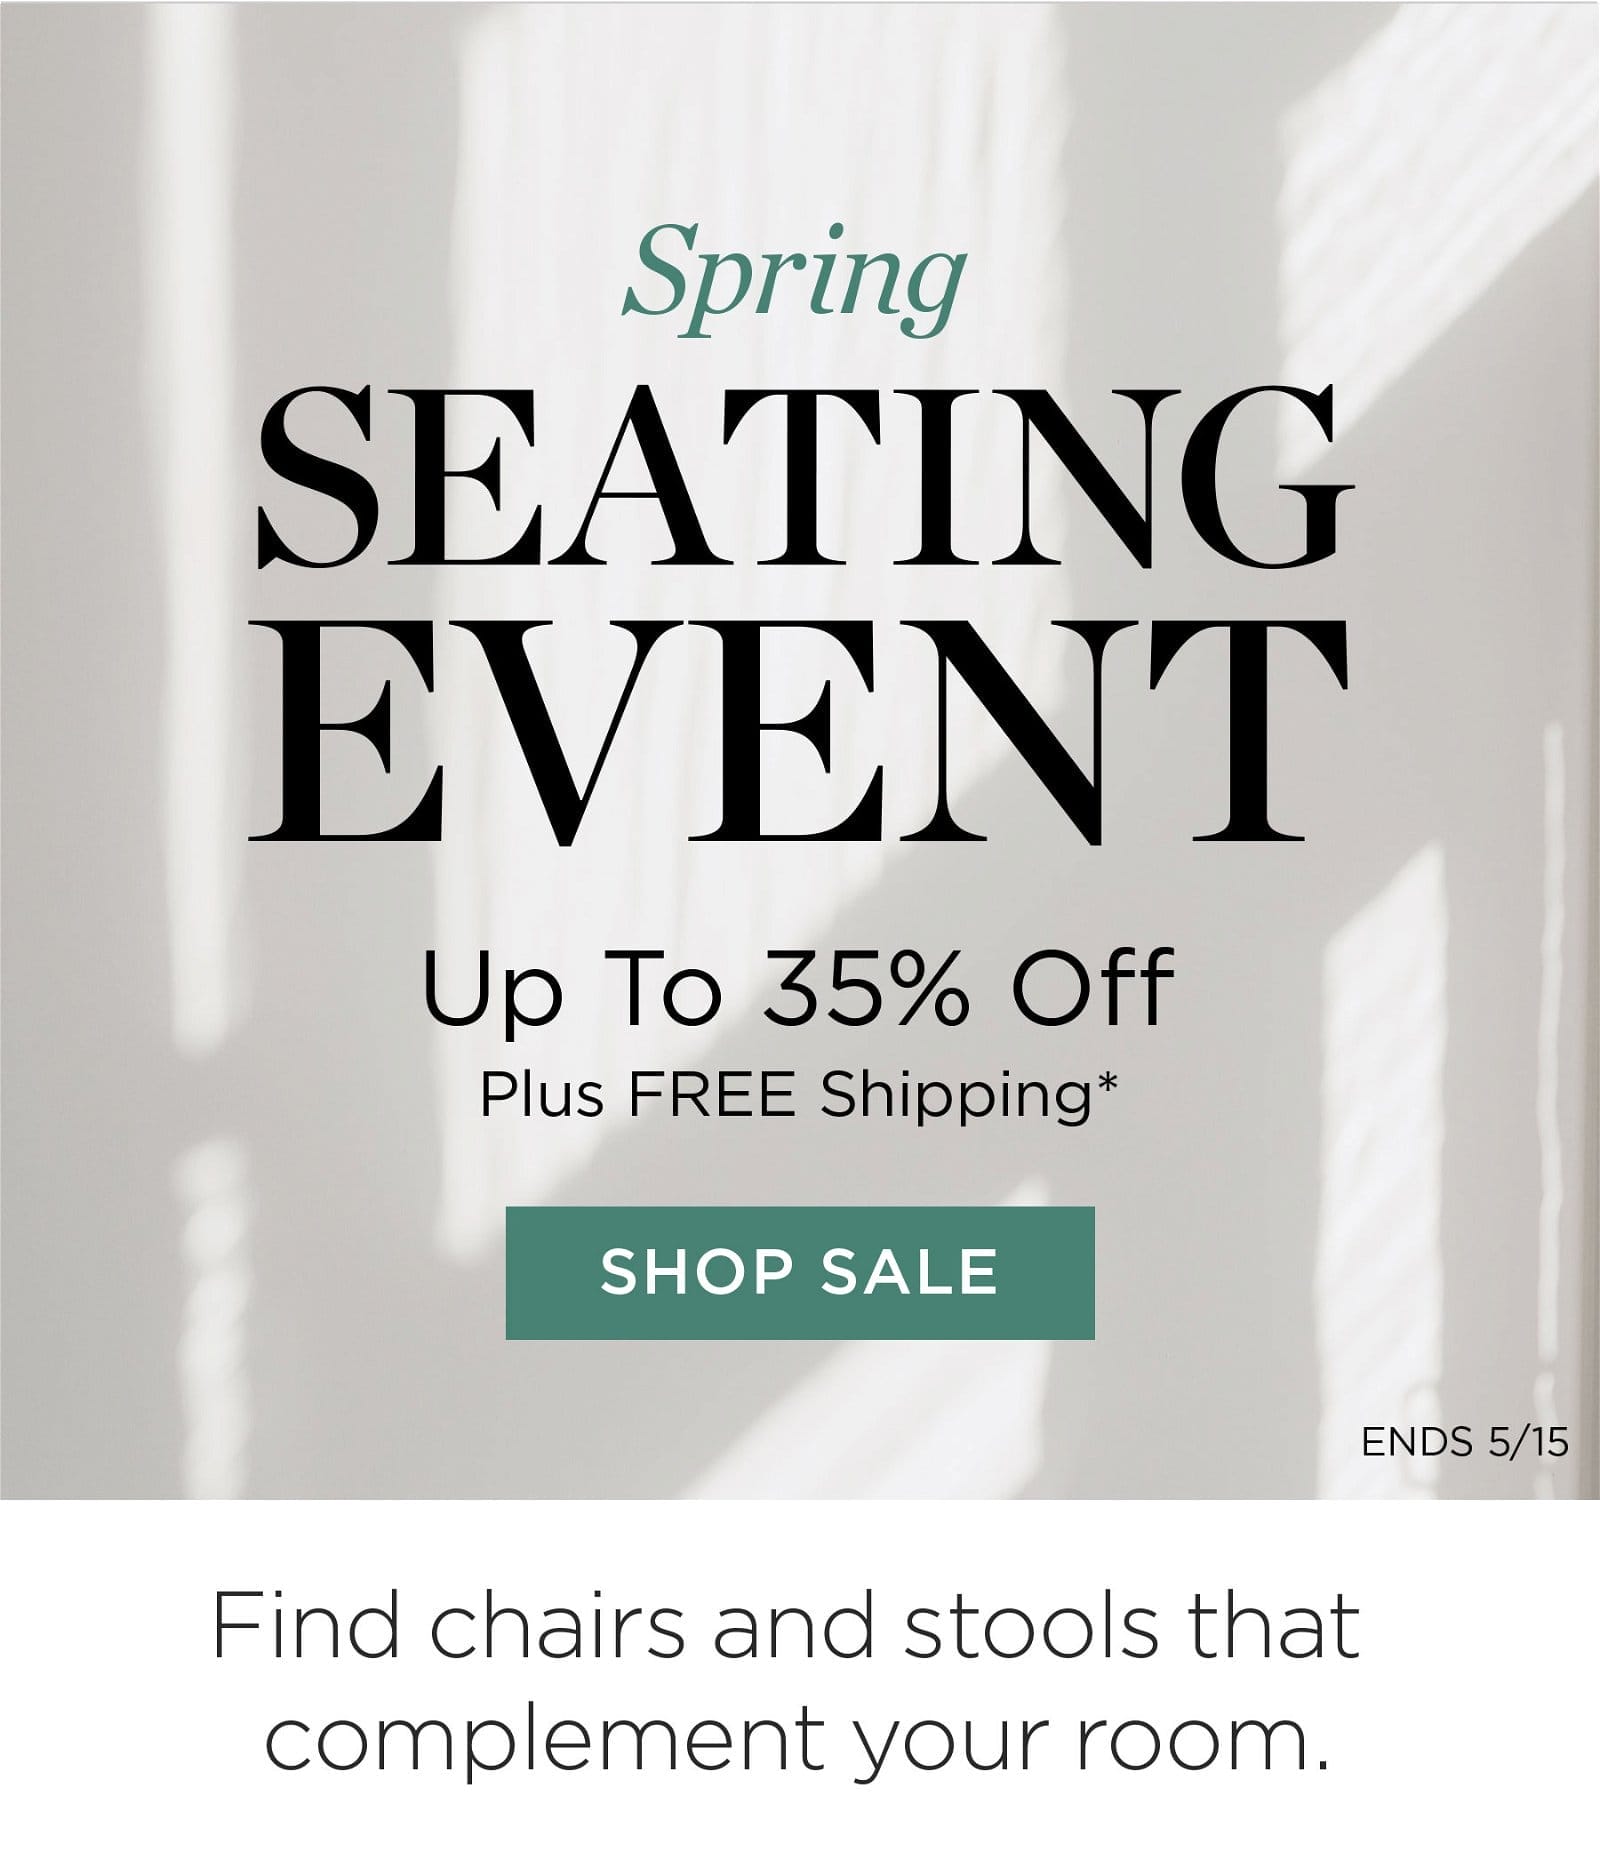 Spring Seating Event - Up to 35% Off + Free Shipping* - Shop Sale - Ends 5/15 - Find chairs and stools that complement your room.